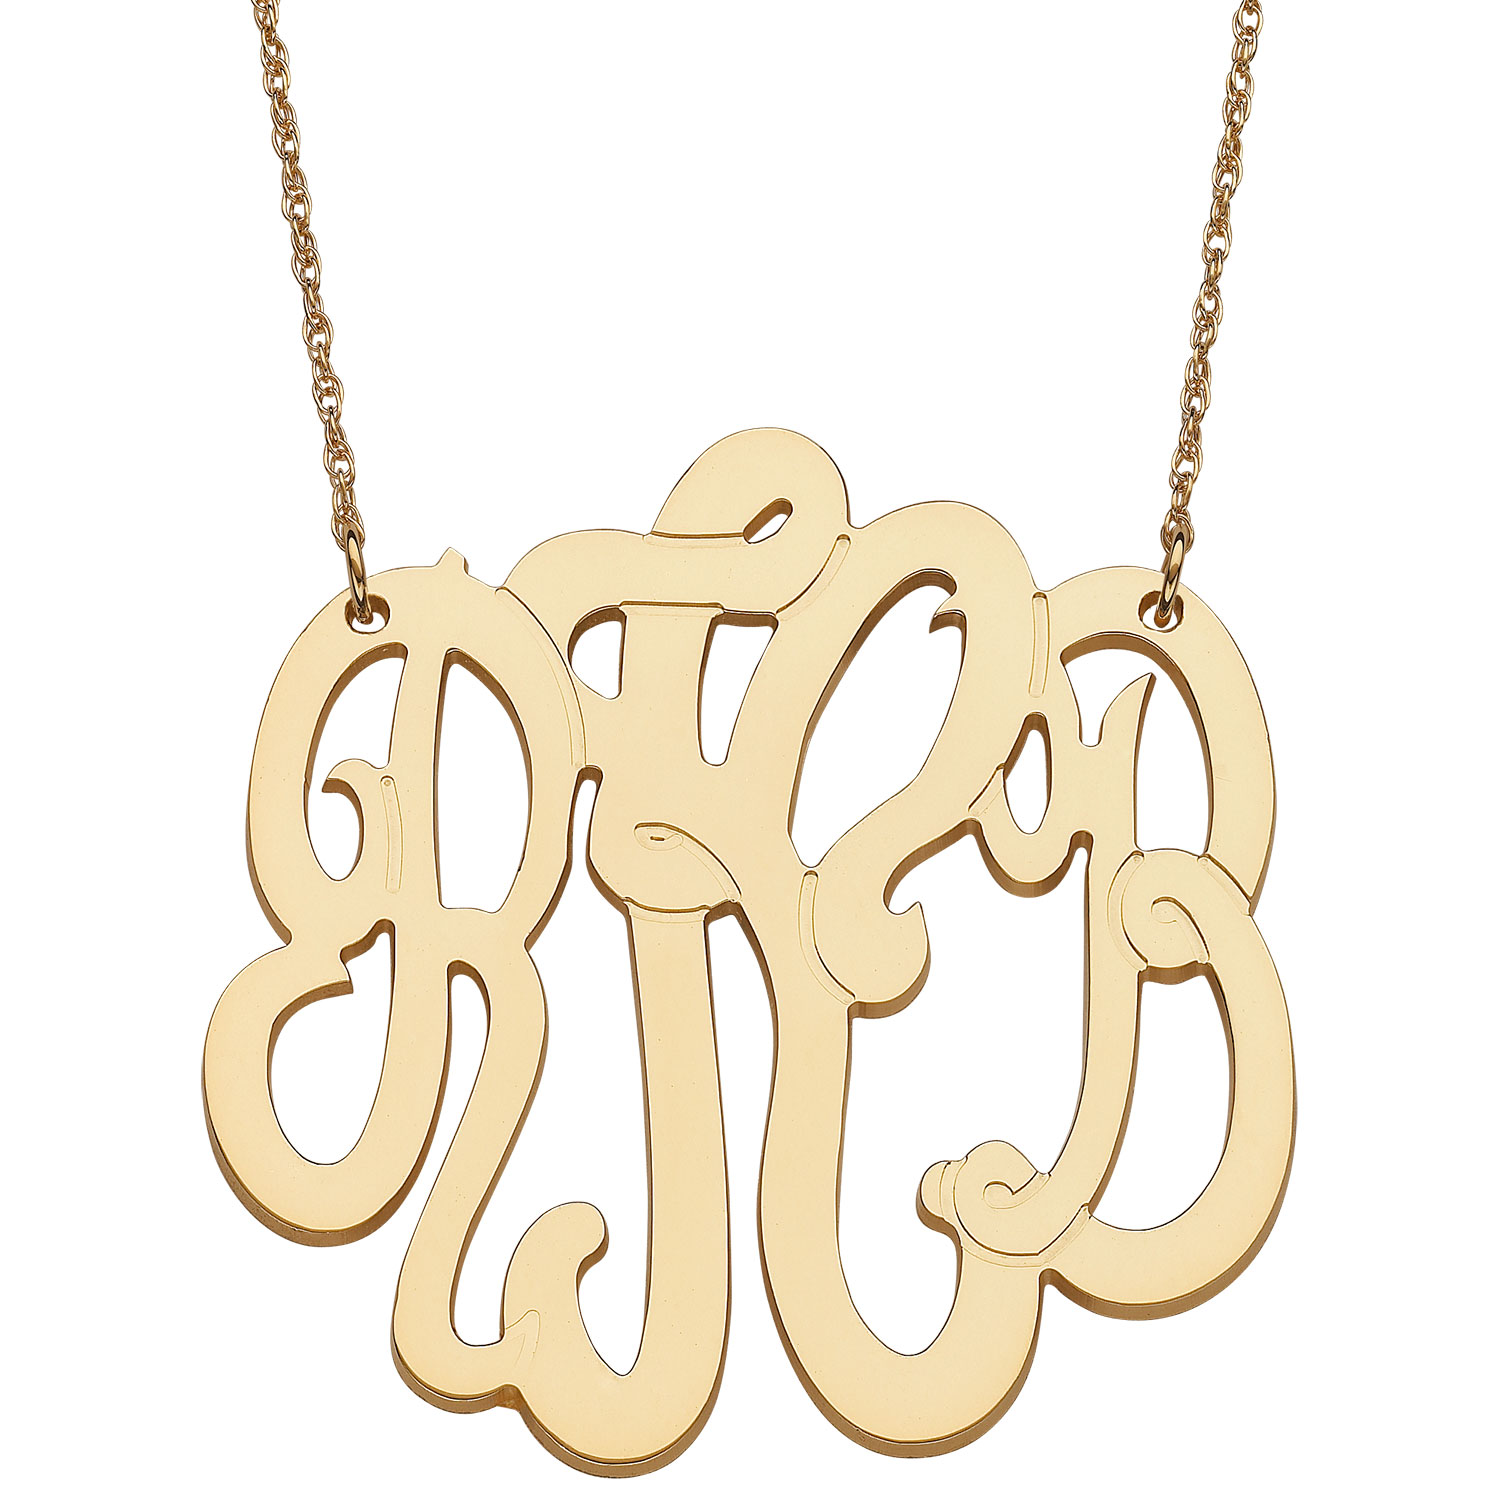 10K Yellow Gold 3- Initial Monogram Necklace - Extra Large